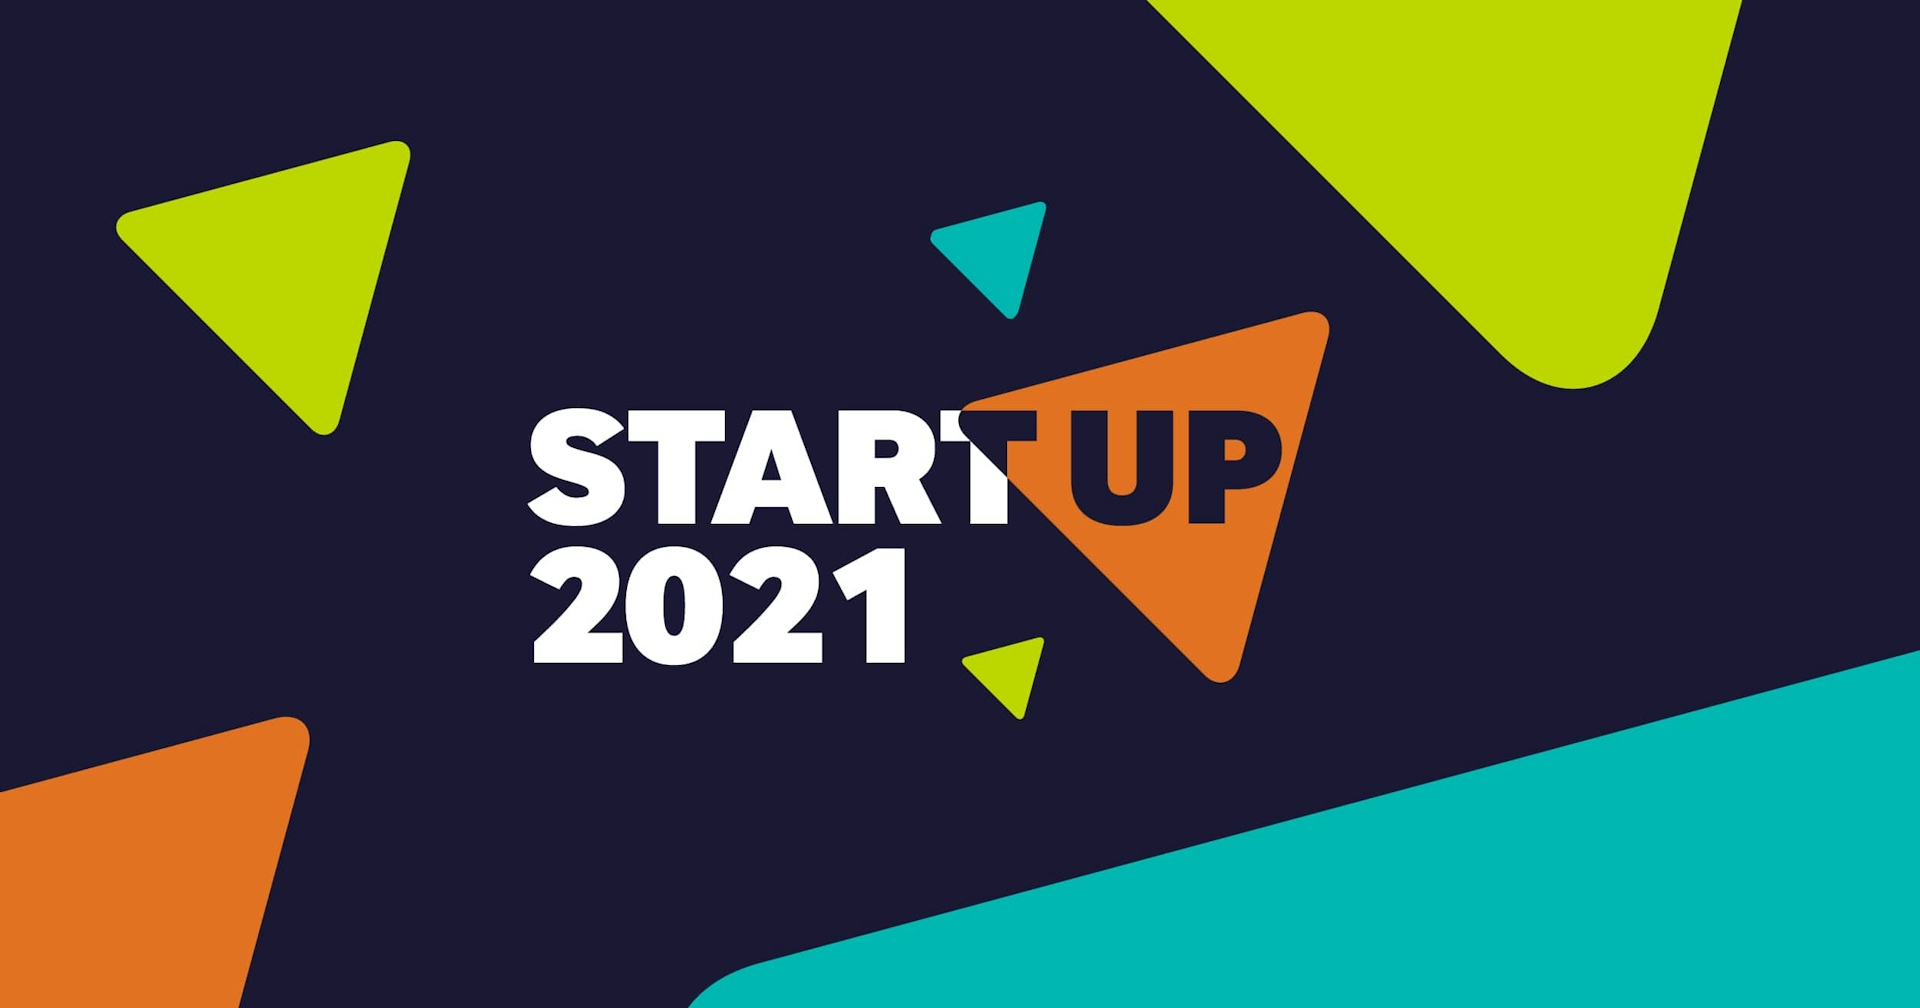 StartUp 2021: Re-watch the Let's get social zone sessions